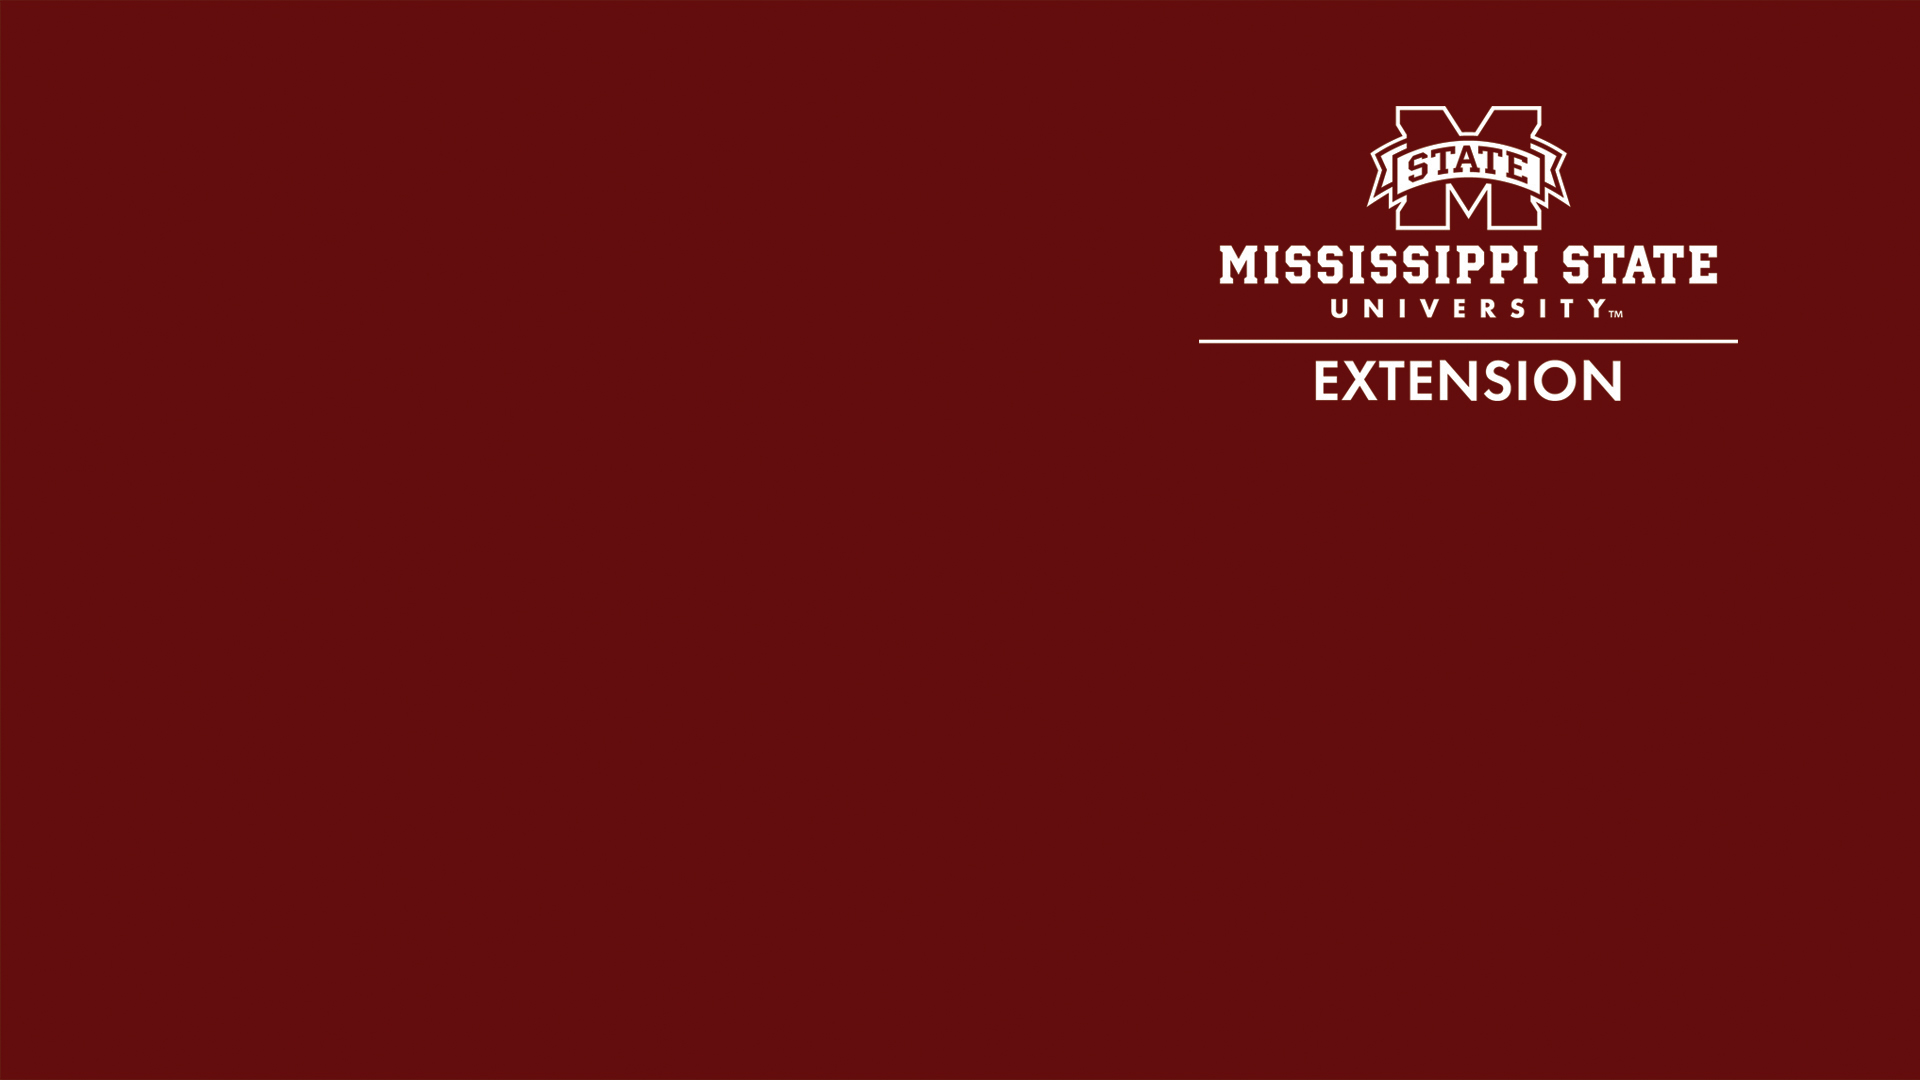 Maroon background with Extension logo in top right.